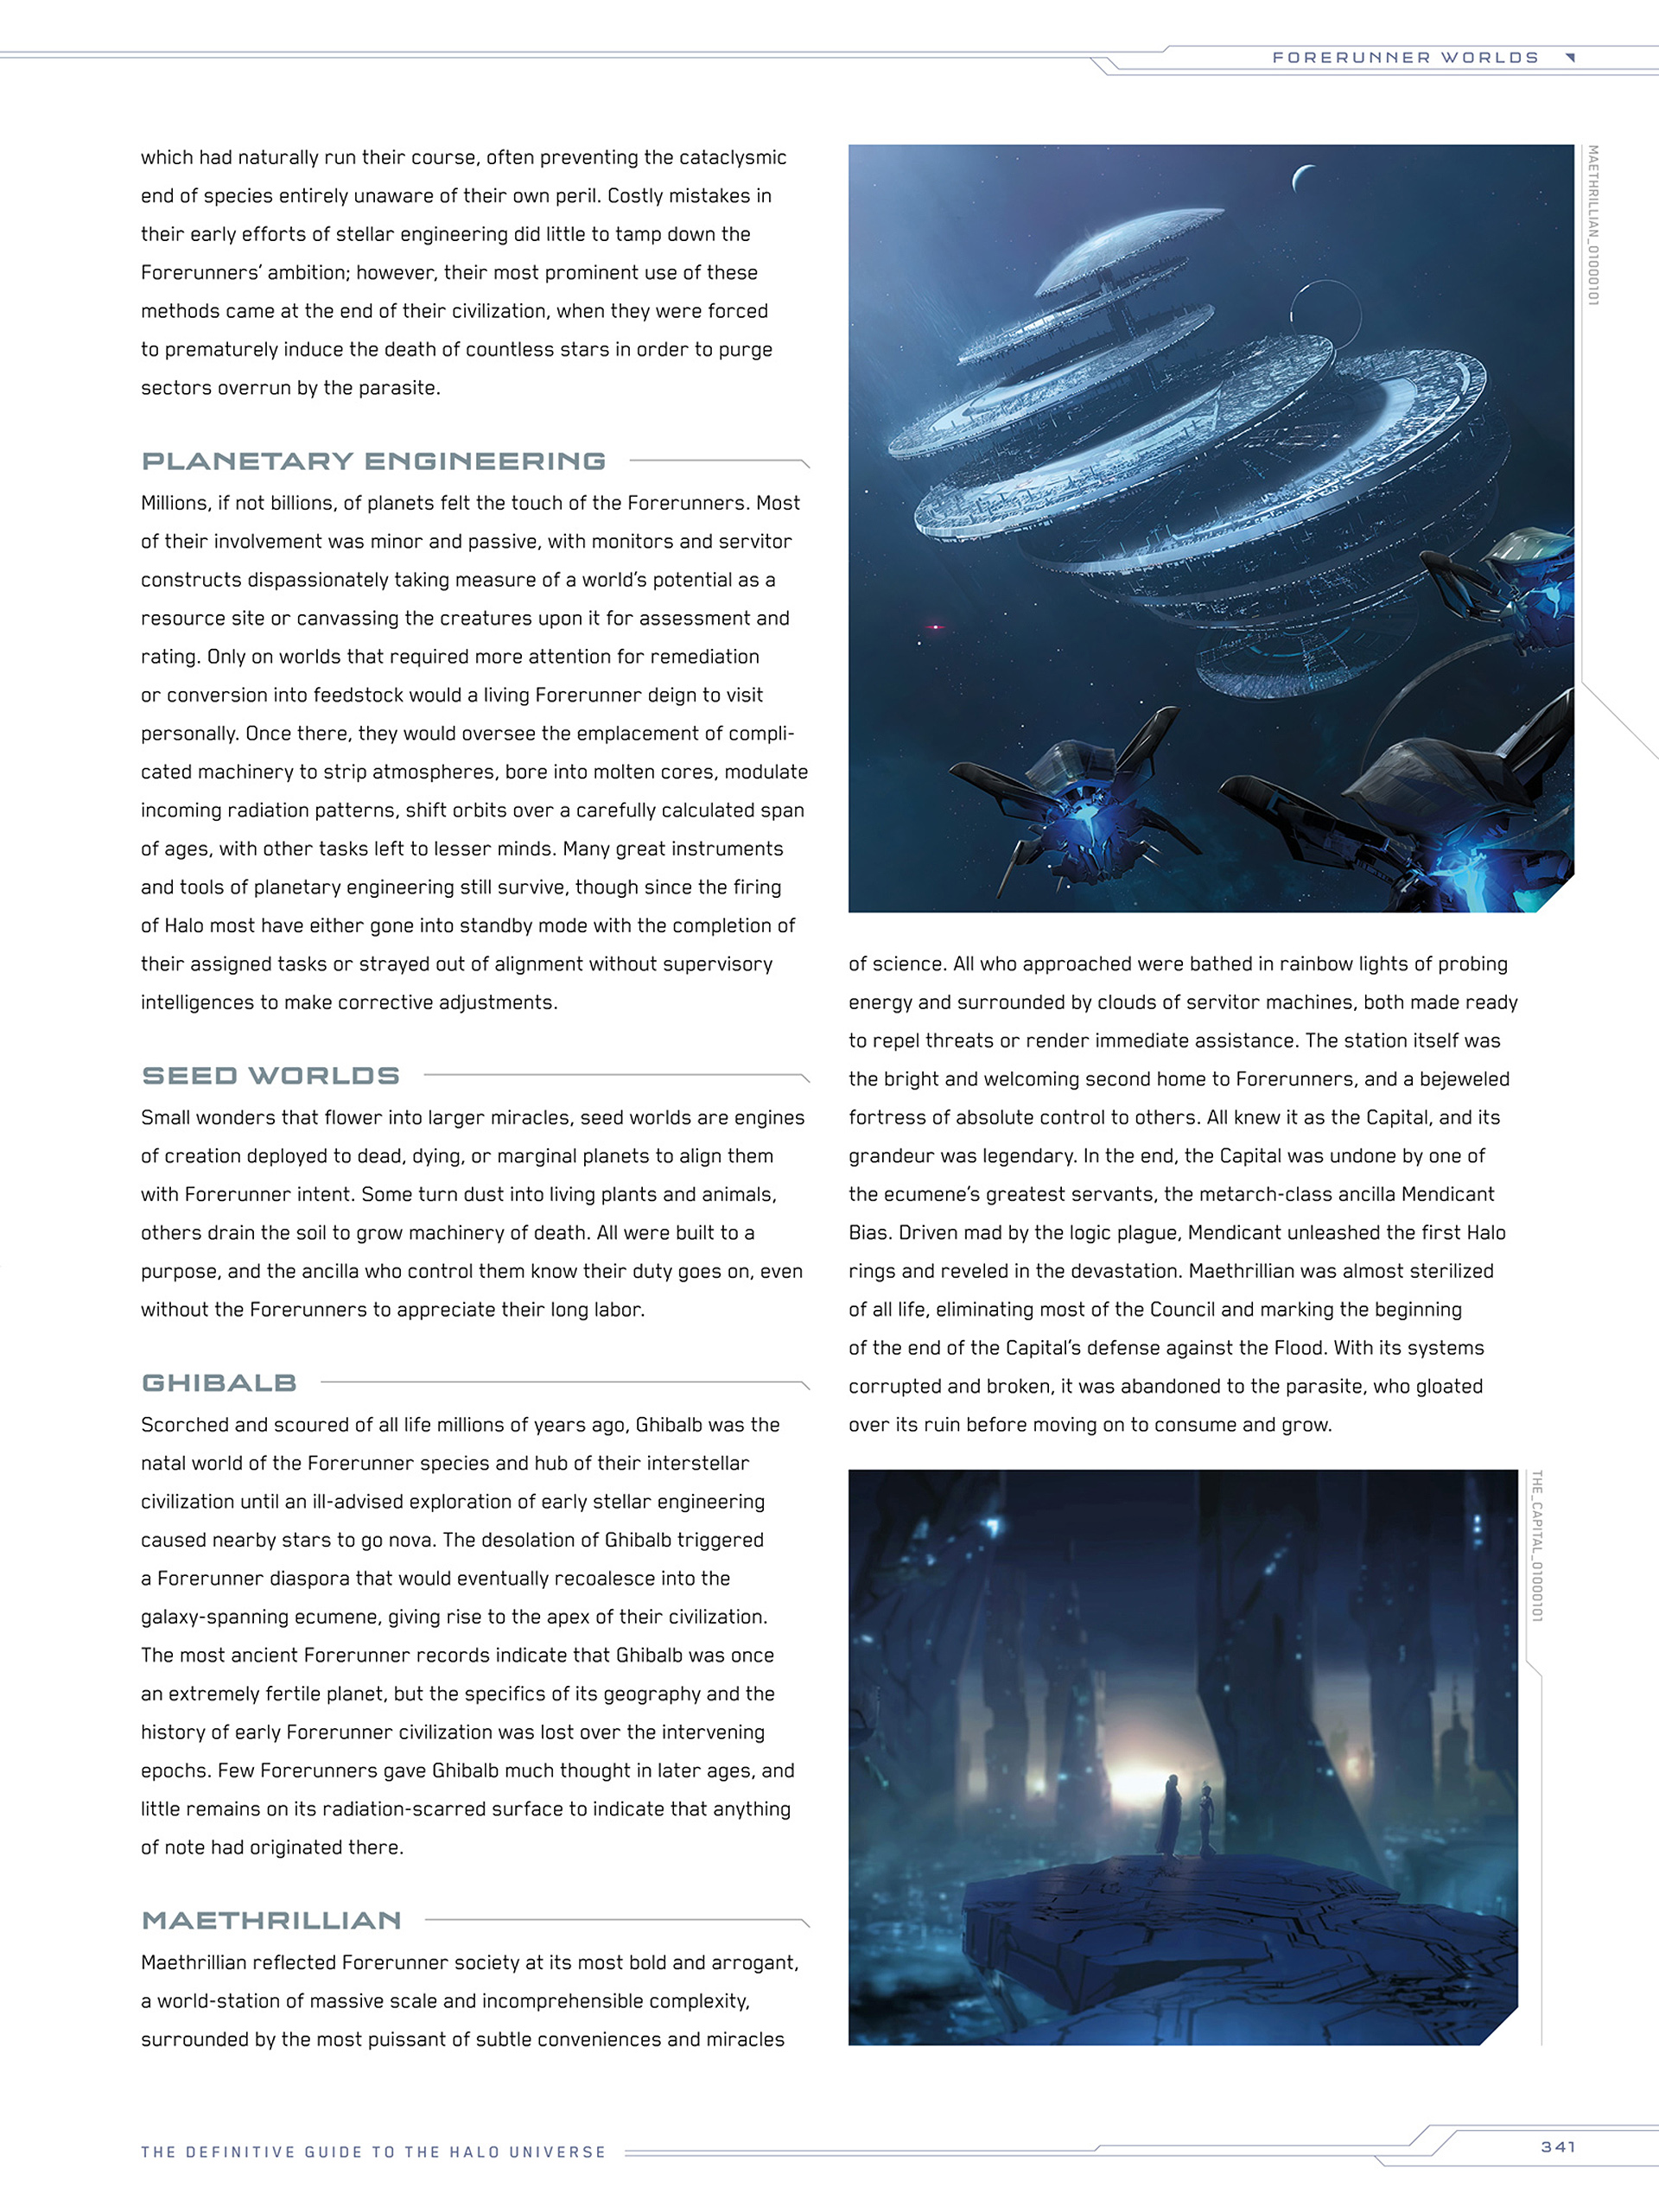 Read online Halo Encyclopedia comic -  Issue # TPB (Part 4) - 36